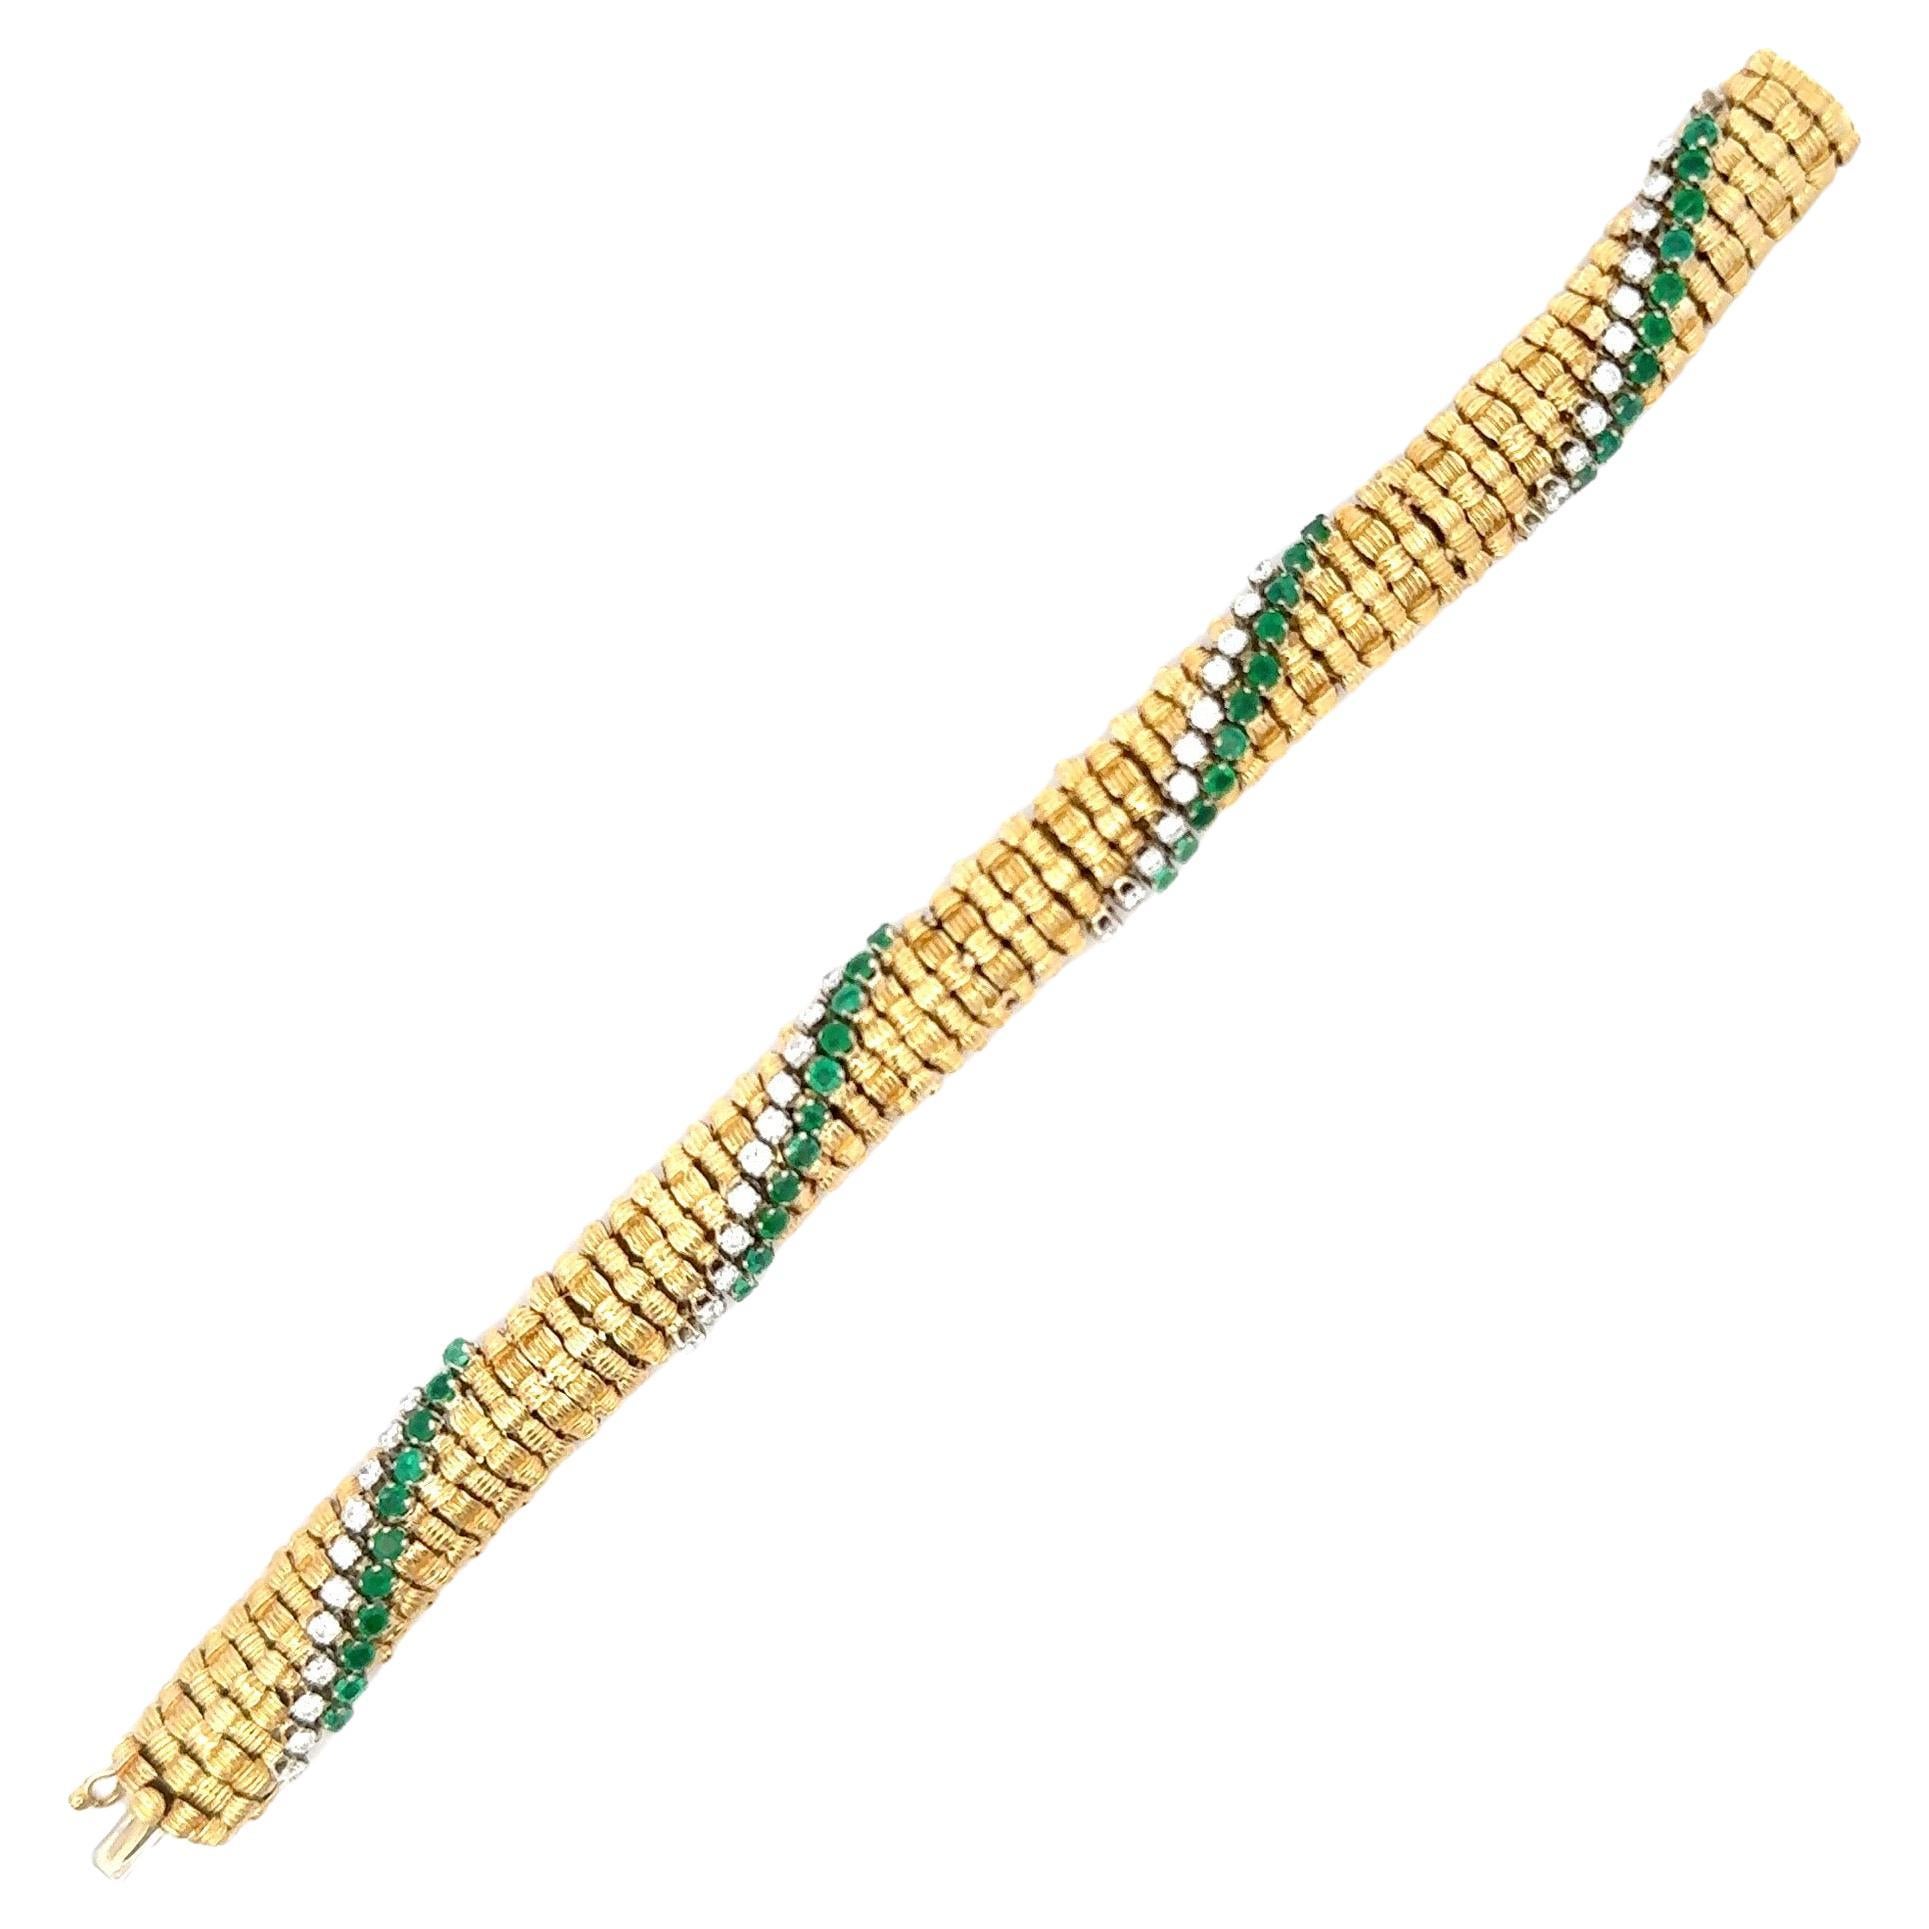 Vintage 18 Karat Yellow Gold Emerald Diamond Woven Motif Bracelet 61.1 Grams In Excellent Condition For Sale In New York, NY